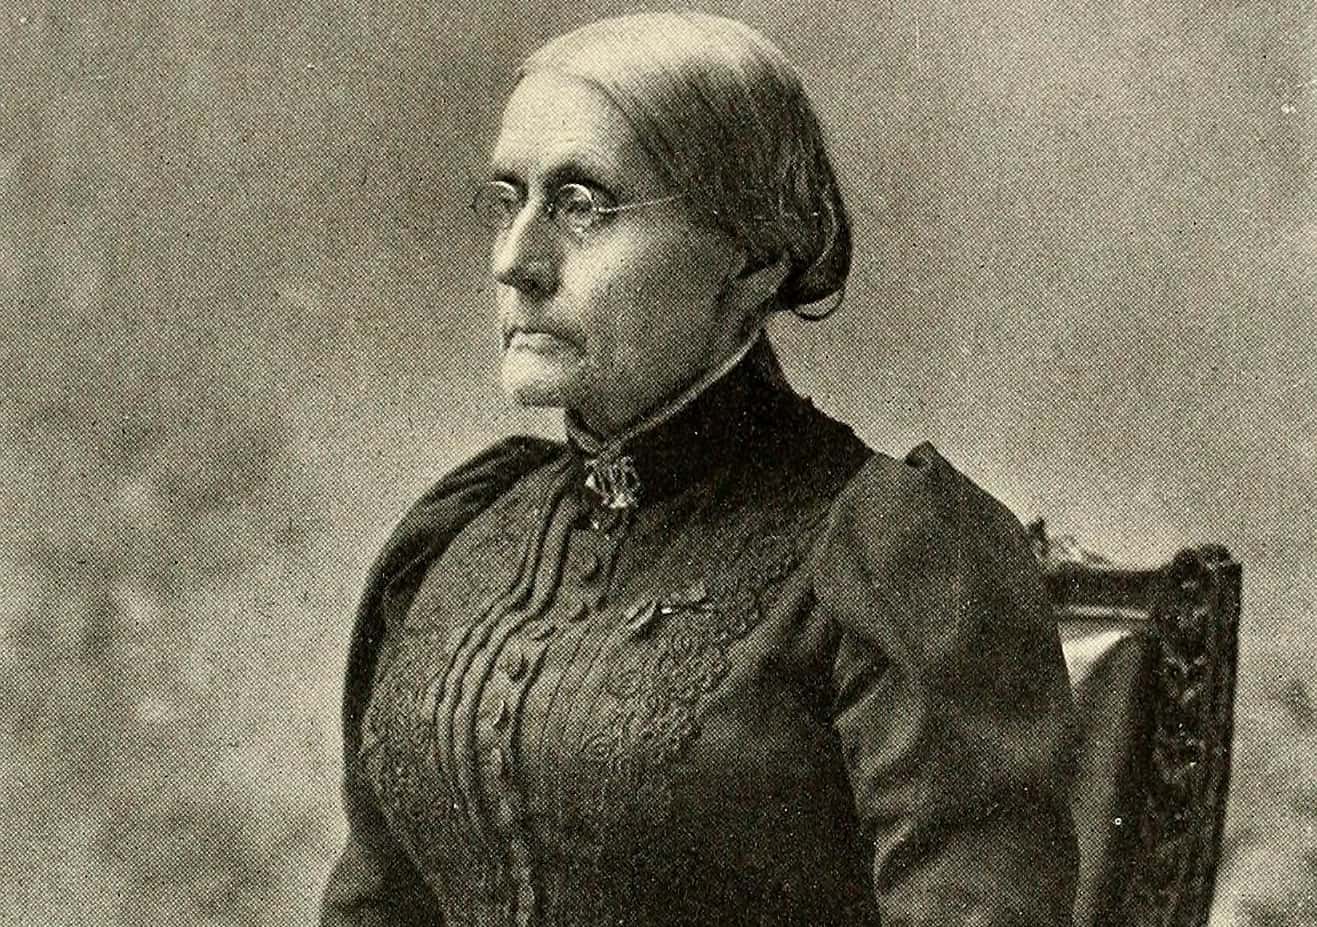 Susan B. Anthony facts